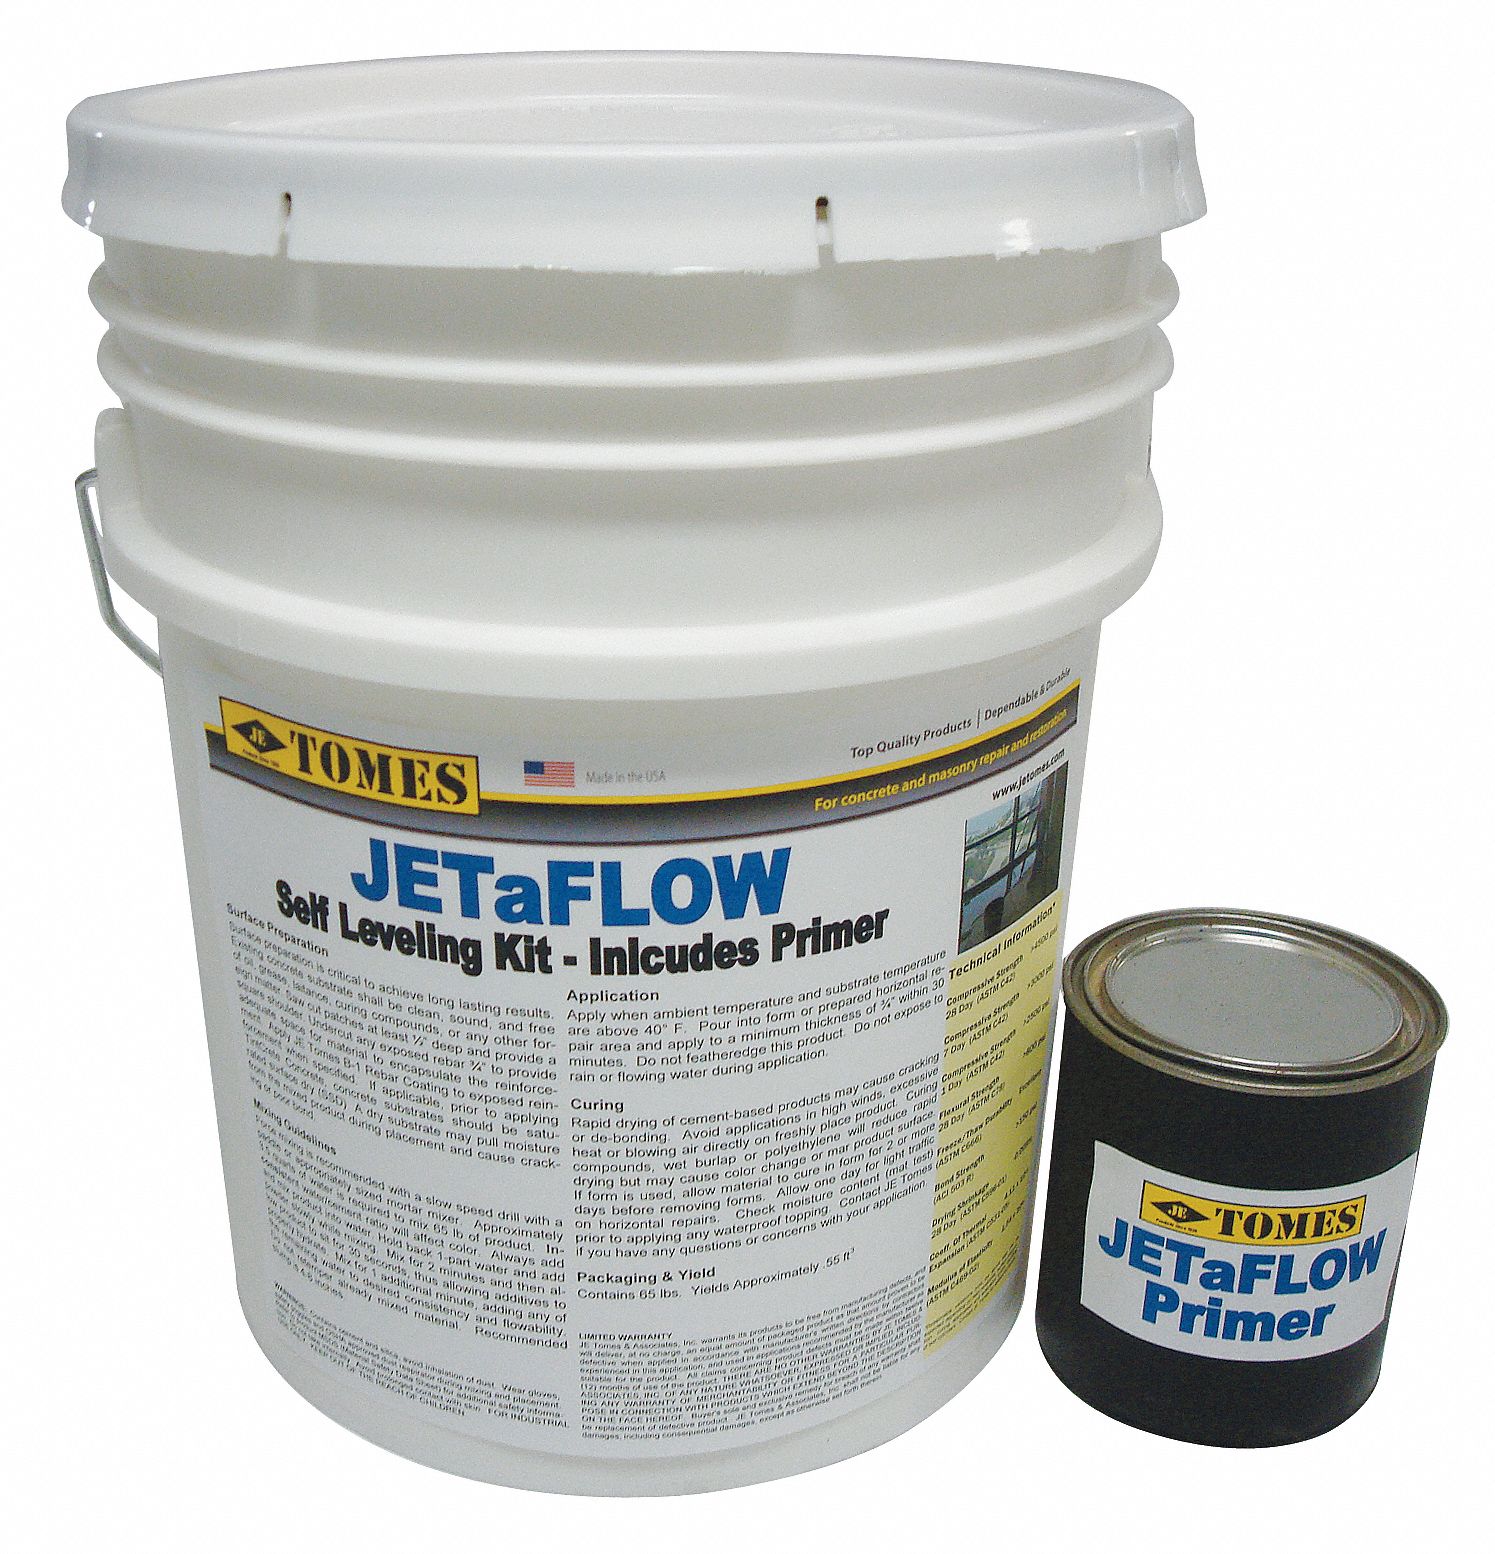 Self-Leveling Concrete Repair and Resurfacing: 50 lb, 20 to 40 min Starts to Harden